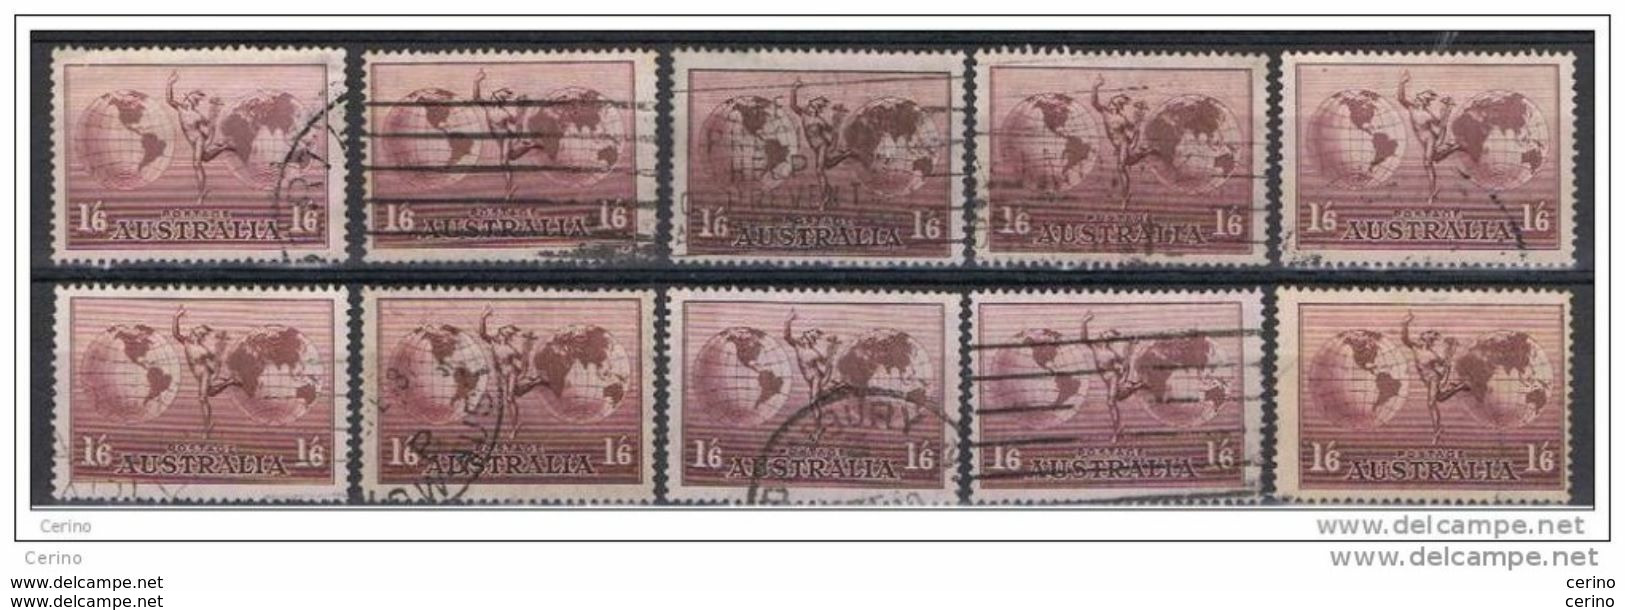 AUSTRALIA:  1937  AIR  MAIL  -  1/6  USED  STAMPS  -  REP.  10  EXEMPLARY  -  YV/TELL. 6 - Used Stamps